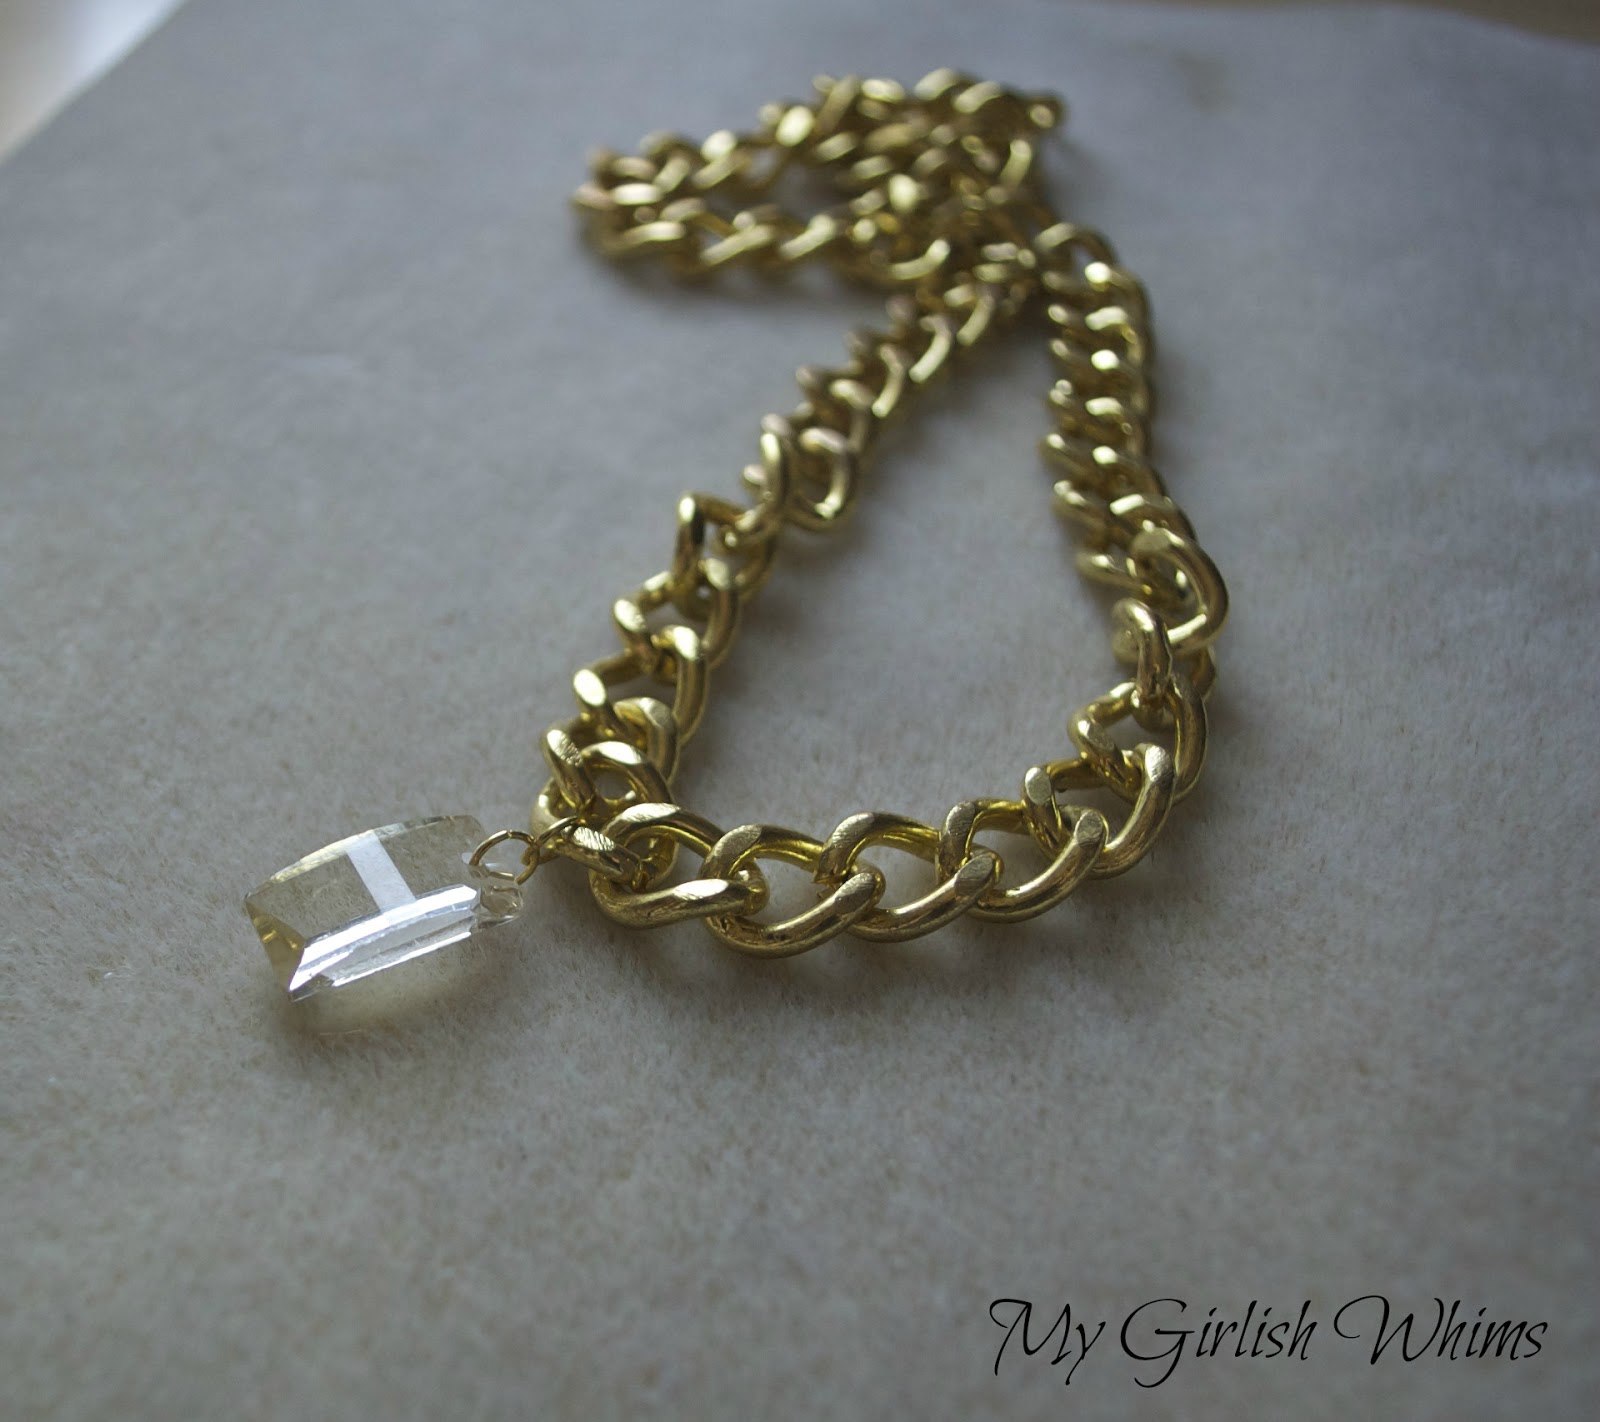 DIY Gold Chain & Crystal Necklace - My Girlish Whims